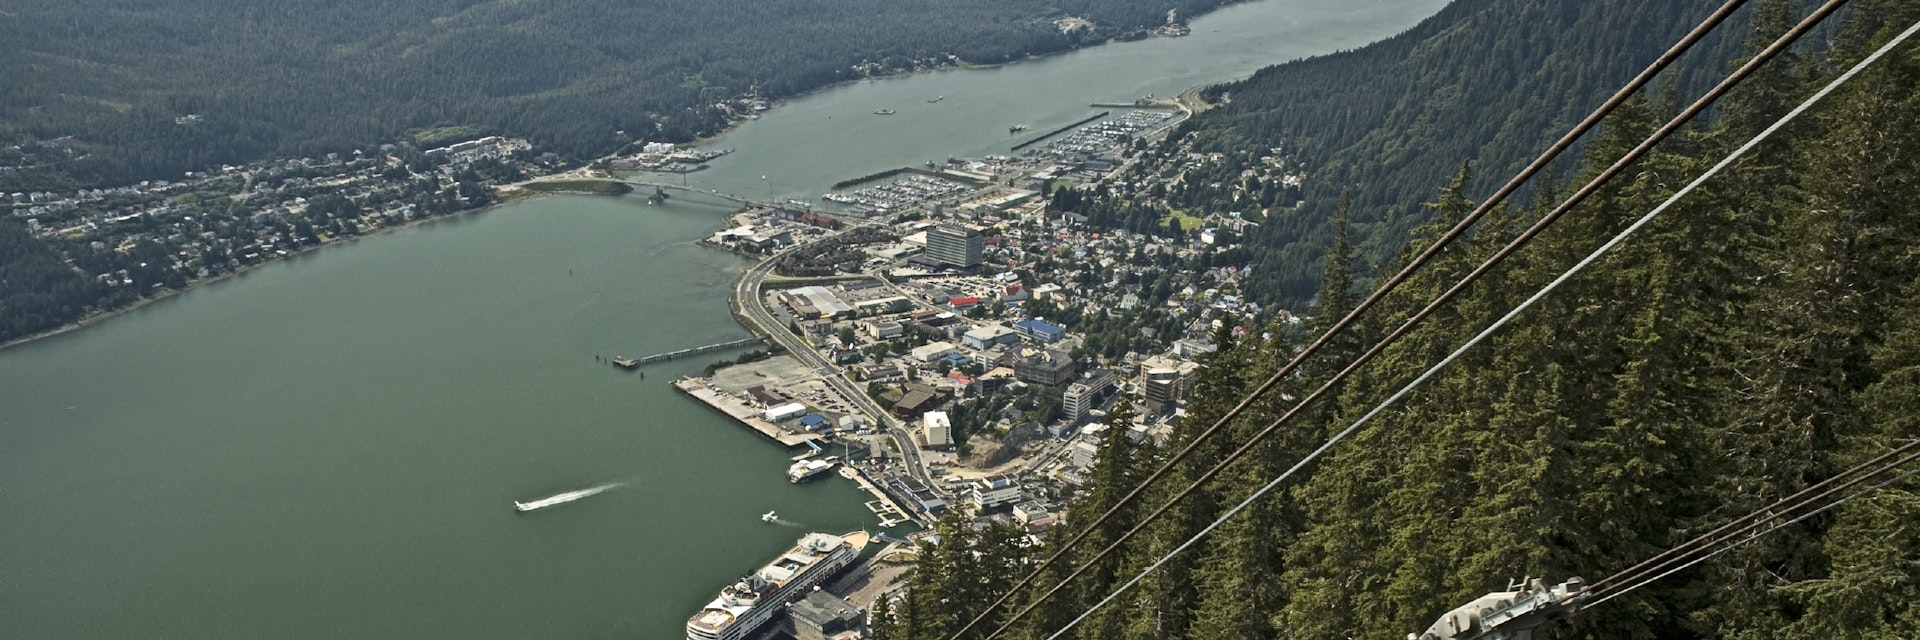 Juneau from Mt. Roberts with tramway.